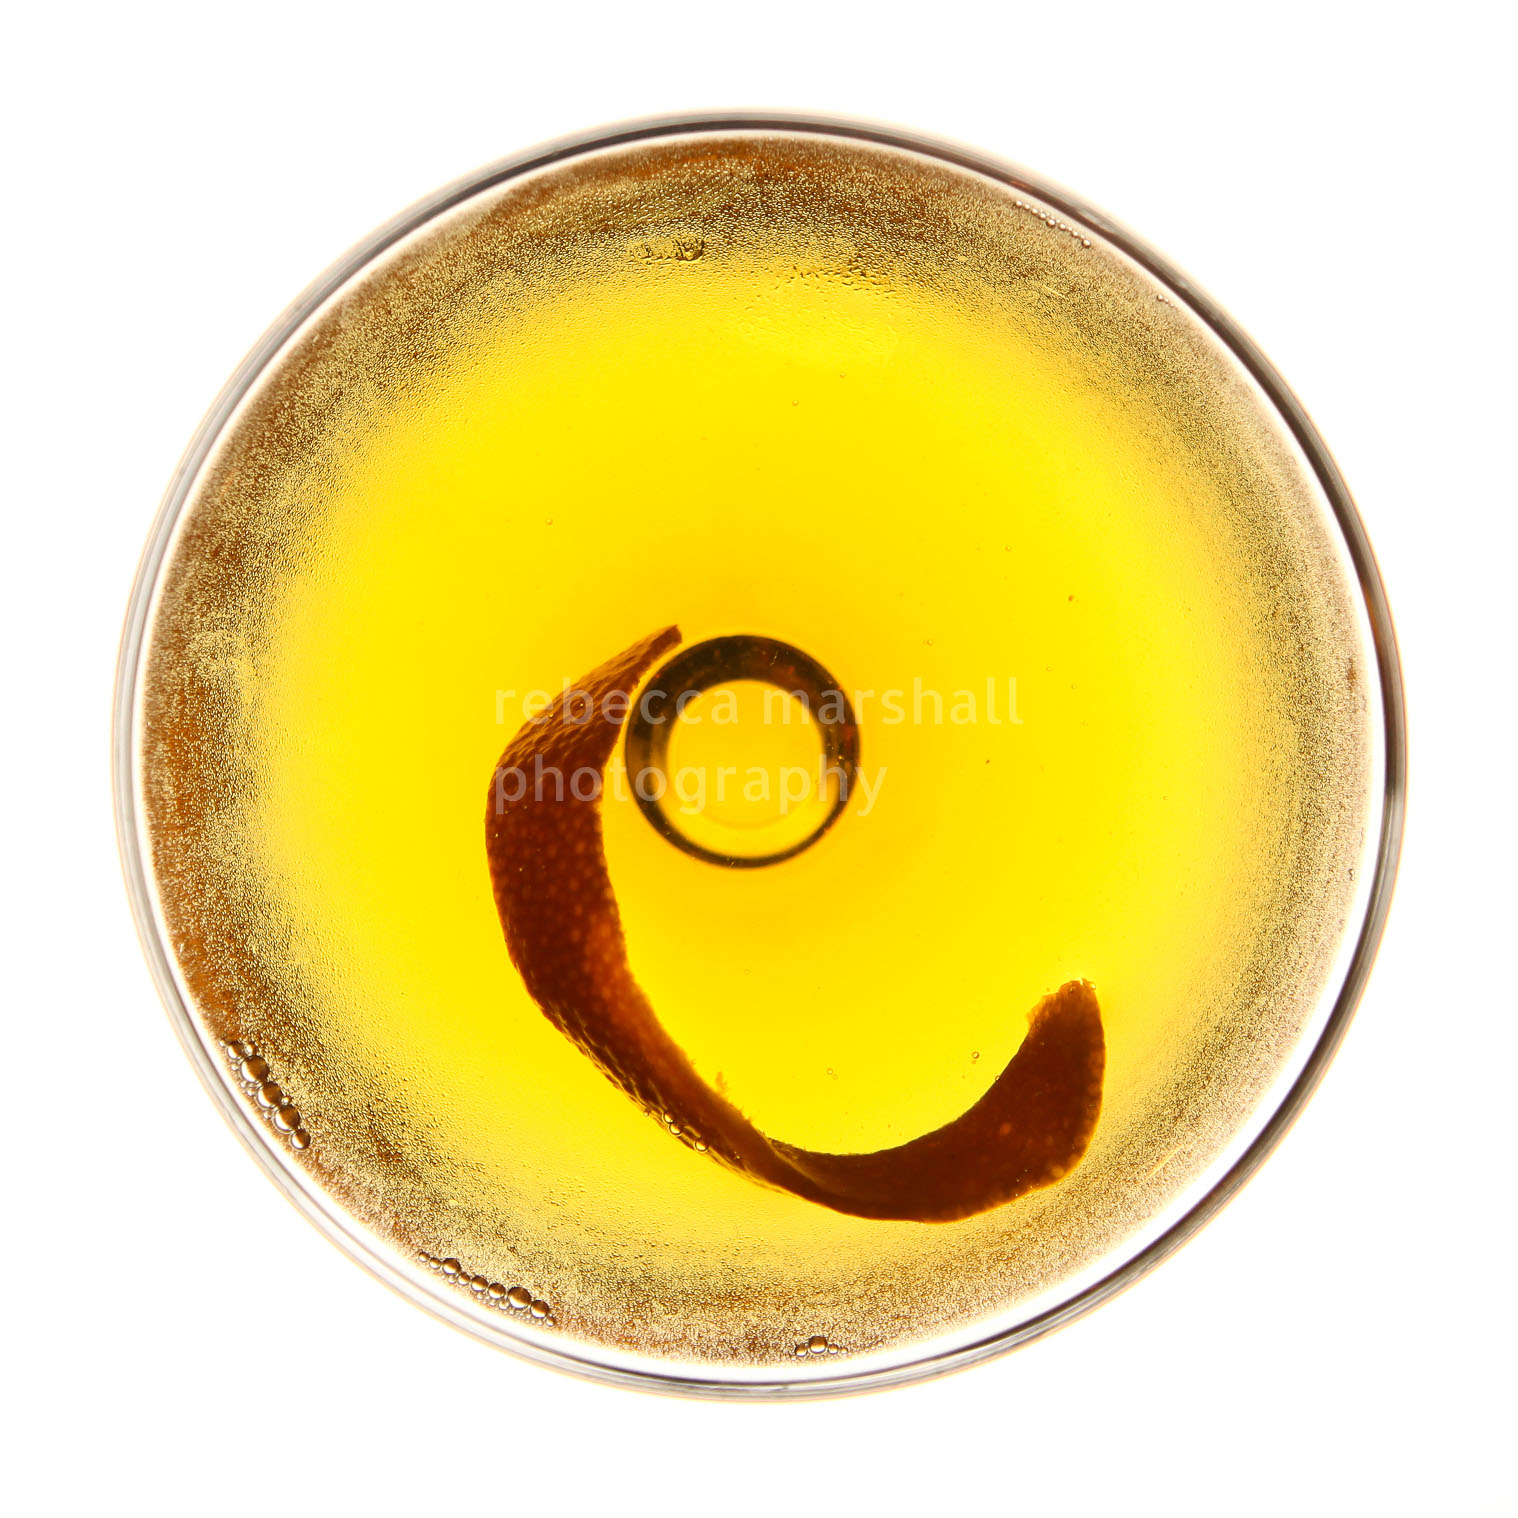 A whisky cocktail photographed from above